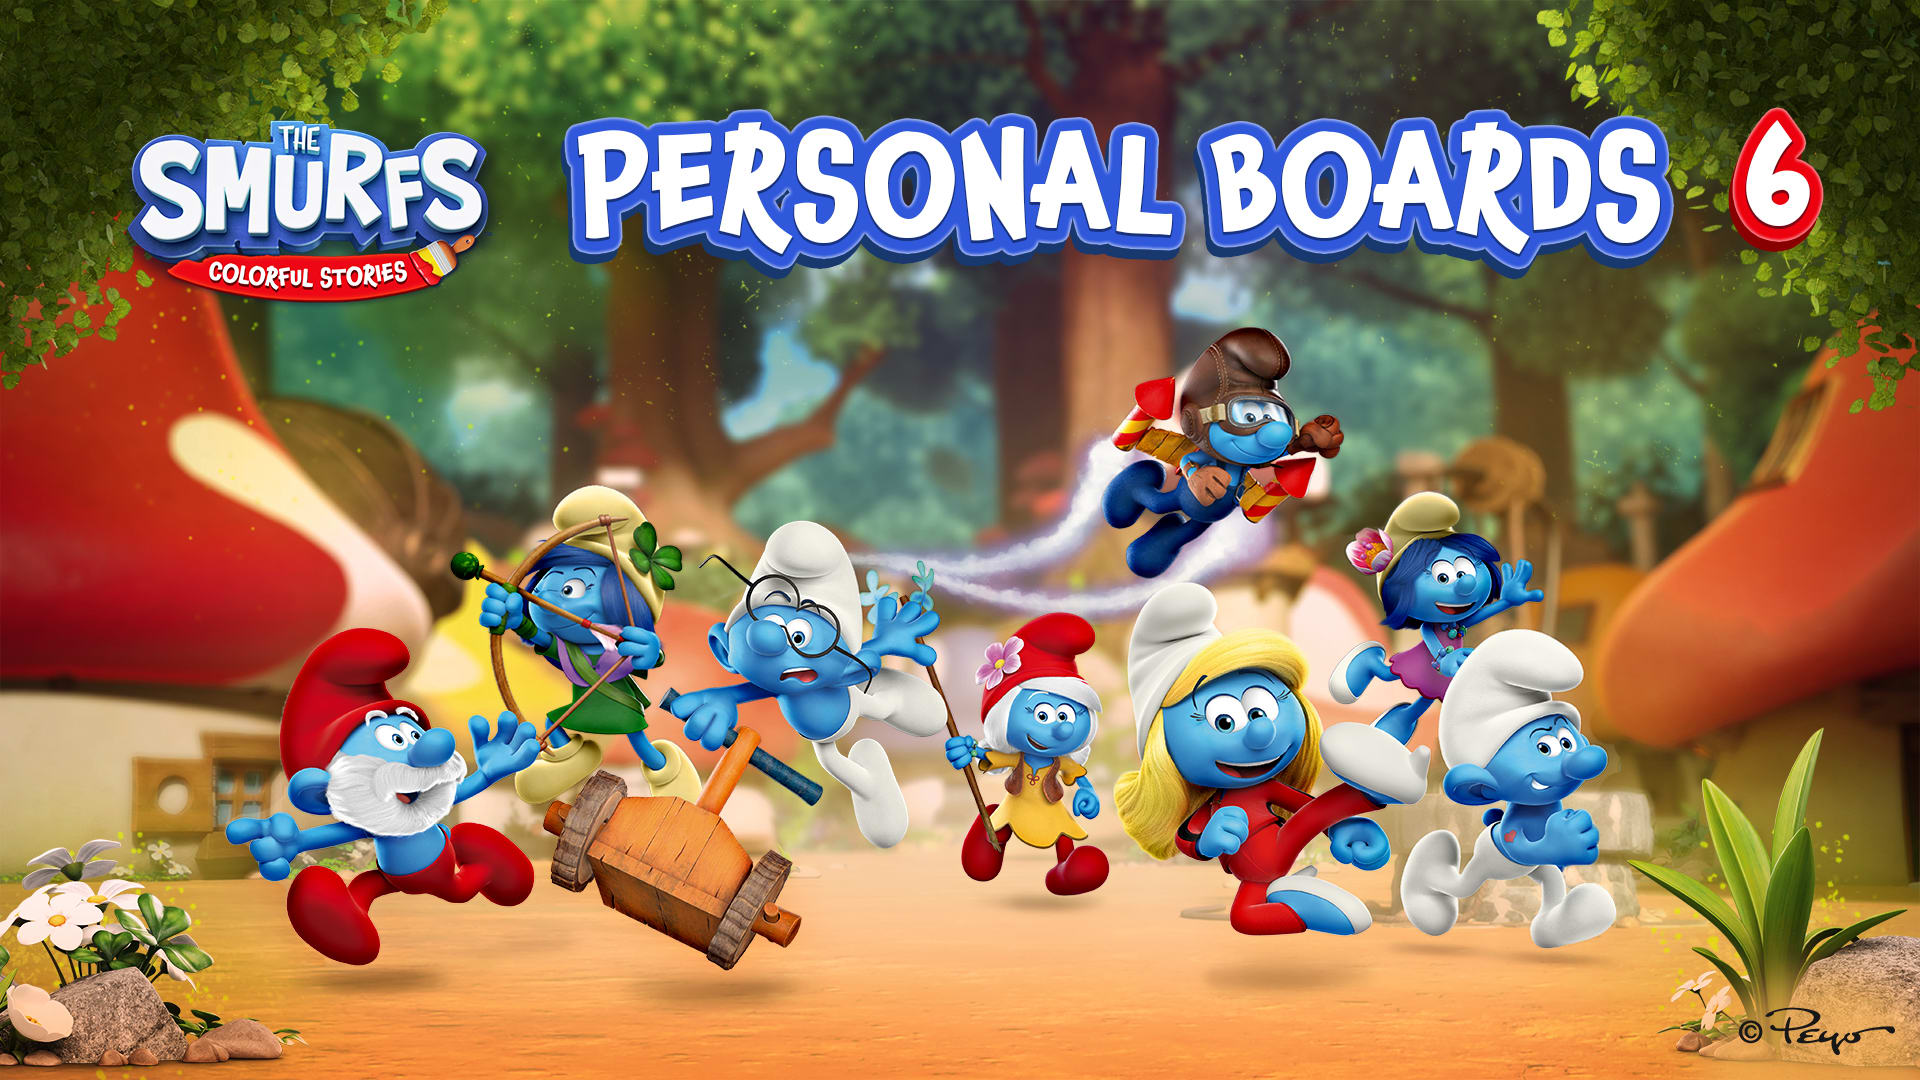 Personal Boards 6